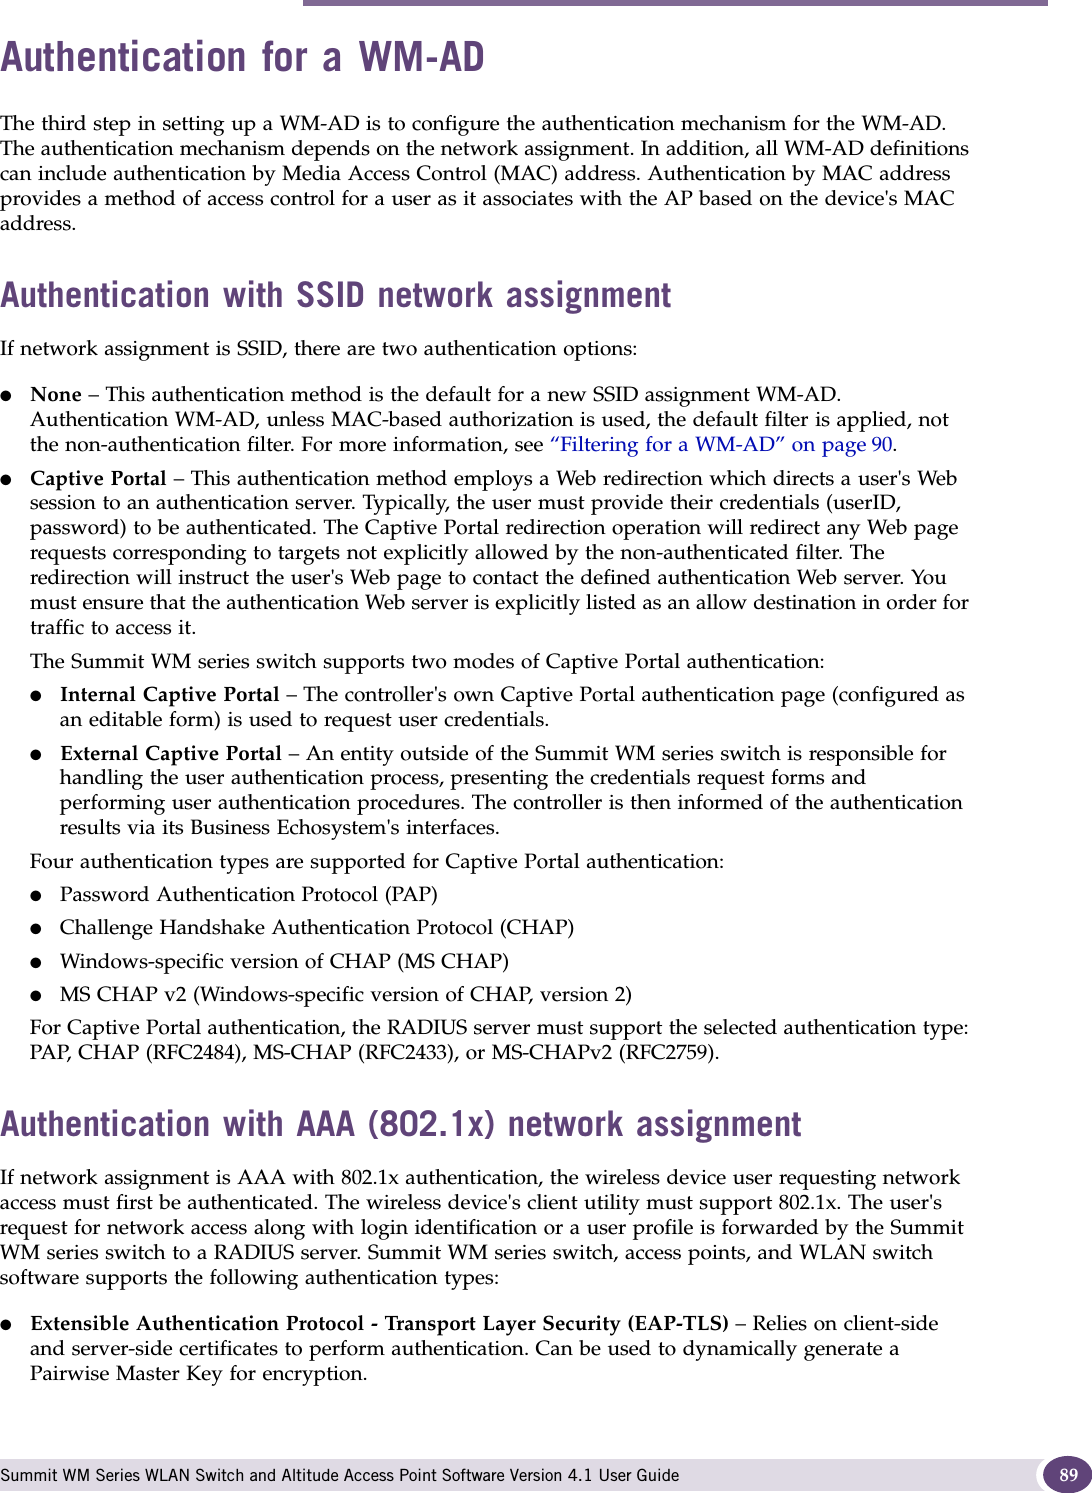 Authentication for a WM-AD Summit WM Series WLAN Switch and Altitude Access Point Software Version 4.1 User Guide 89Authentication for a WM-ADThe third step in setting up a WM-AD is to configure the authentication mechanism for the WM-AD. The authentication mechanism depends on the network assignment. In addition, all WM-AD definitions can include authentication by Media Access Control (MAC) address. Authentication by MAC address provides a method of access control for a user as it associates with the AP based on the device&apos;s MAC address. Authentication with SSID network assignmentIf network assignment is SSID, there are two authentication options:●None – This authentication method is the default for a new SSID assignment WM-AD. Authentication WM-AD, unless MAC-based authorization is used, the default filter is applied, not the non-authentication filter. For more information, see “Filtering for a WM-AD” on page 90. ●Captive Portal – This authentication method employs a Web redirection which directs a user&apos;s Web session to an authentication server. Typically, the user must provide their credentials (userID, password) to be authenticated. The Captive Portal redirection operation will redirect any Web page requests corresponding to targets not explicitly allowed by the non-authenticated filter. The redirection will instruct the user&apos;s Web page to contact the defined authentication Web server. You must ensure that the authentication Web server is explicitly listed as an allow destination in order for traffic to access it.The Summit WM series switch supports two modes of Captive Portal authentication:●Internal Captive Portal – The controller&apos;s own Captive Portal authentication page (configured as an editable form) is used to request user credentials.●External Captive Portal – An entity outside of the Summit WM series switch is responsible for handling the user authentication process, presenting the credentials request forms and performing user authentication procedures. The controller is then informed of the authentication results via its Business Echosystem&apos;s interfaces.Four authentication types are supported for Captive Portal authentication:●Password Authentication Protocol (PAP)●Challenge Handshake Authentication Protocol (CHAP)●Windows-specific version of CHAP (MS CHAP)●MS CHAP v2 (Windows-specific version of CHAP, version 2)For Captive Portal authentication, the RADIUS server must support the selected authentication type: PAP, CHAP (RFC2484), MS-CHAP (RFC2433), or MS-CHAPv2 (RFC2759).Authentication with AAA (802.1x) network assignmentIf network assignment is AAA with 802.1x authentication, the wireless device user requesting network access must first be authenticated. The wireless device&apos;s client utility must support 802.1x. The user&apos;s request for network access along with login identification or a user profile is forwarded by the Summit WM series switch to a RADIUS server. Summit WM series switch, access points, and WLAN switch software supports the following authentication types:●Extensible Authentication Protocol - Transport Layer Security (EAP-TLS) – Relies on client-side and server-side certificates to perform authentication. Can be used to dynamically generate a Pairwise Master Key for encryption.